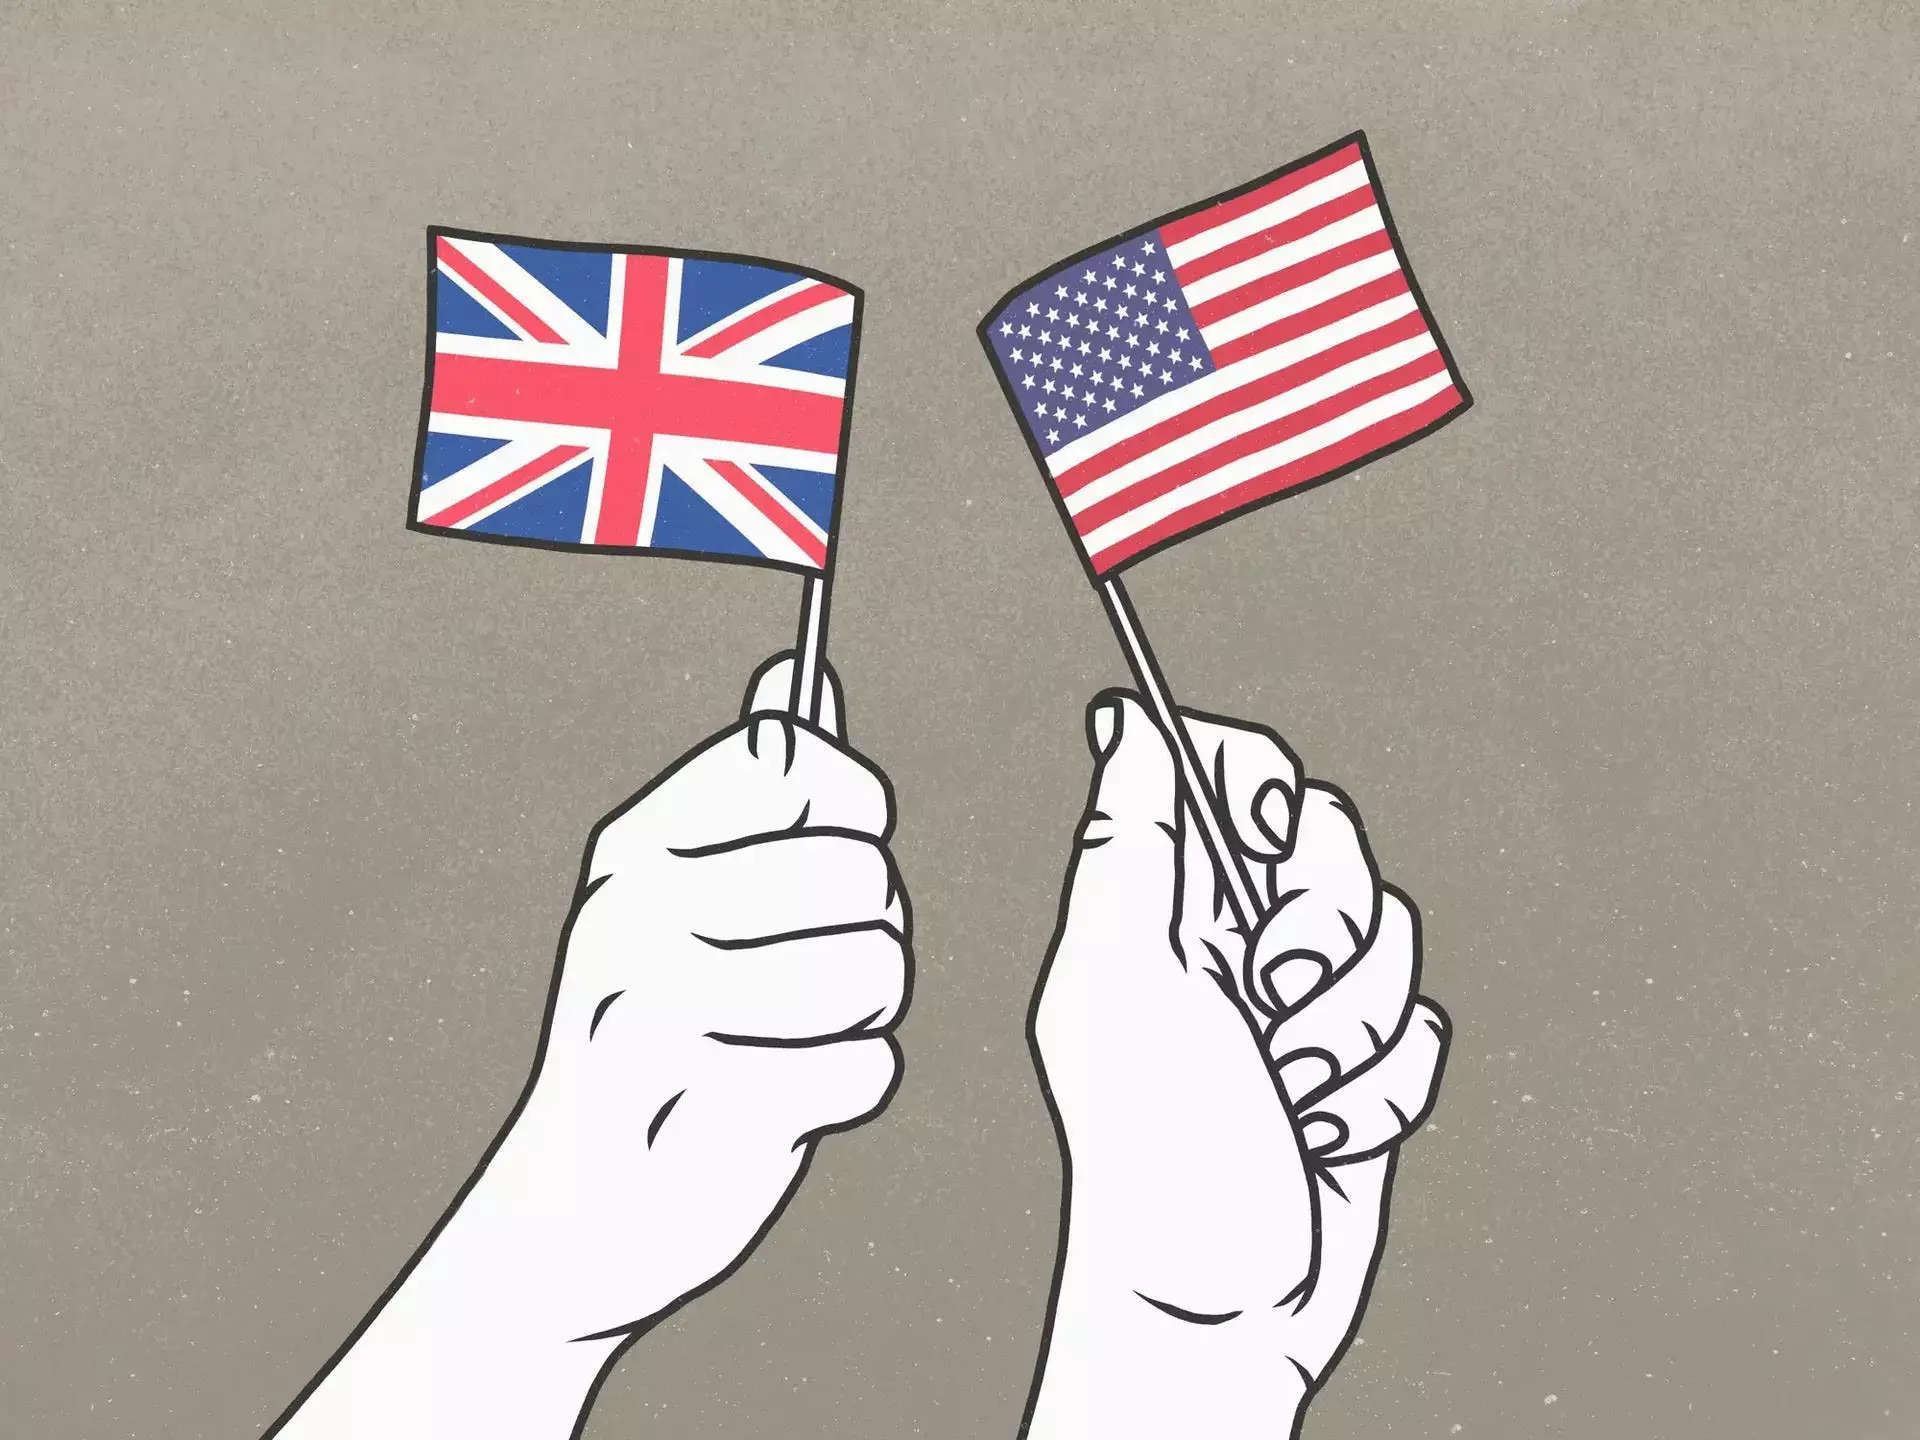 digital illustration of a hand holding a British flag and another hand holding a US flag